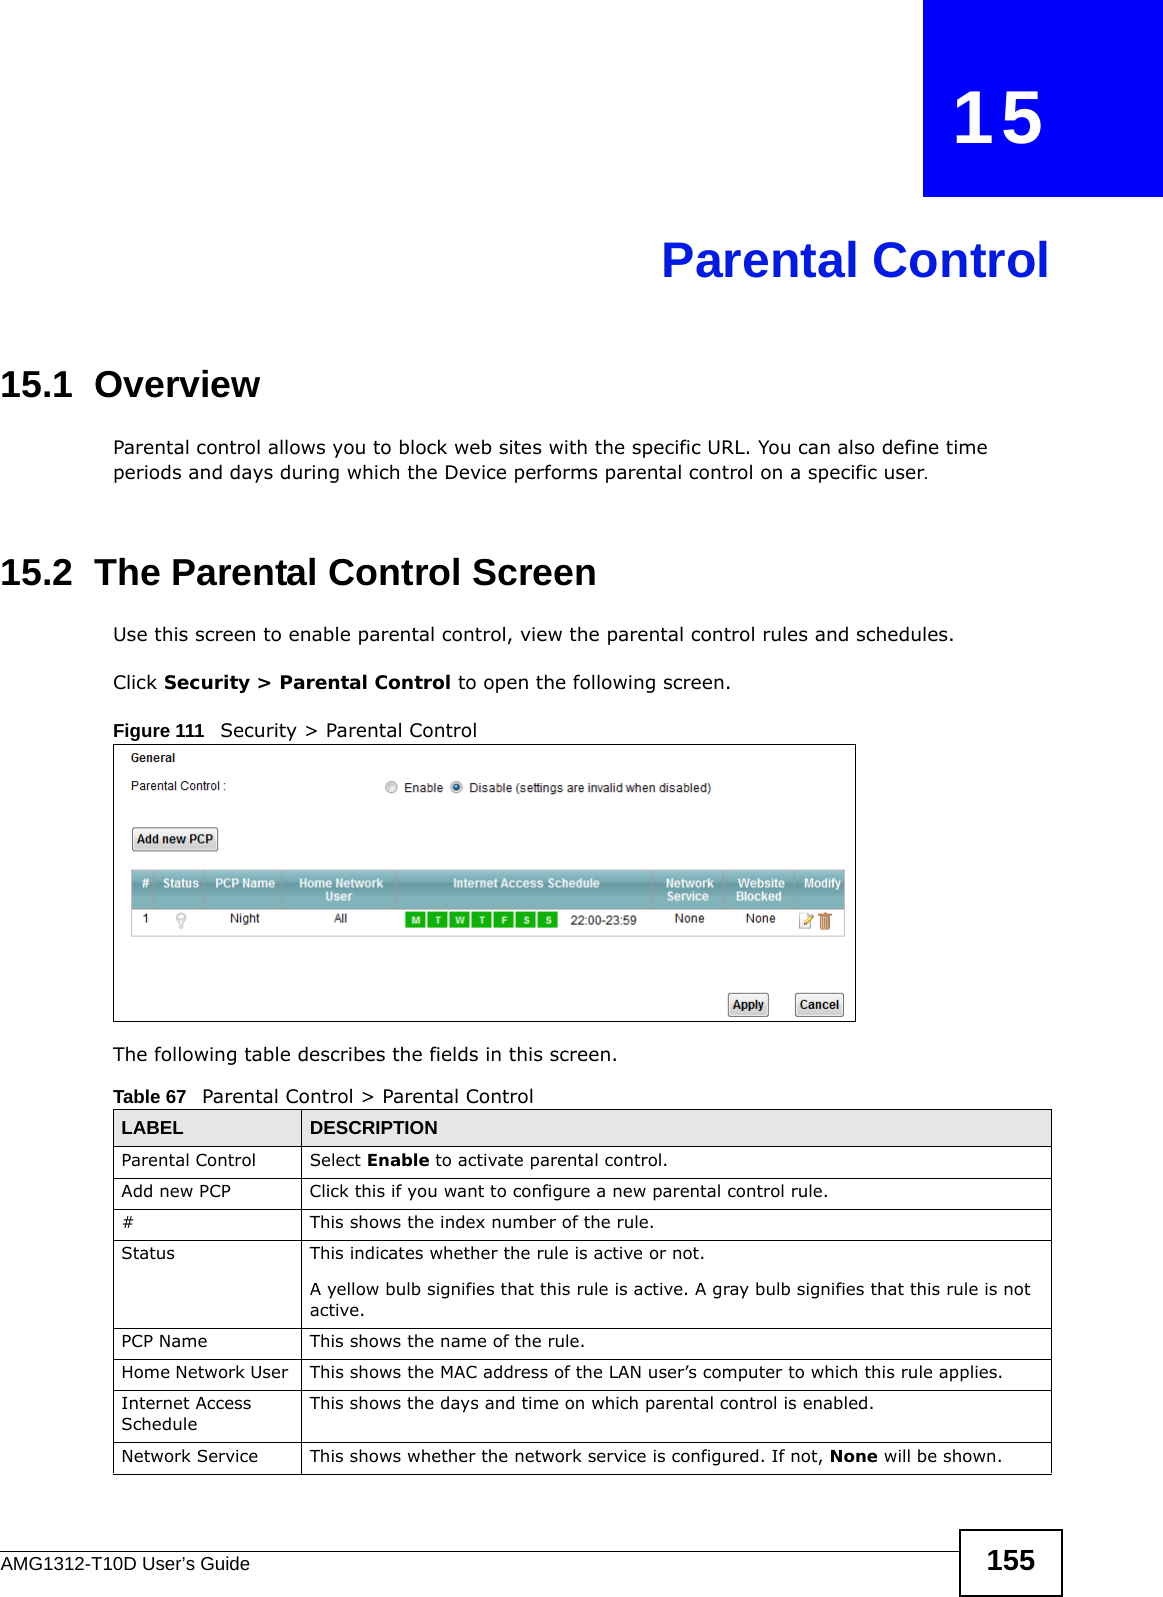 AMG1312-T10D User’s Guide 155CHAPTER   15Parental Control15.1  OverviewParental control allows you to block web sites with the specific URL. You can also define time periods and days during which the Device performs parental control on a specific user. 15.2  The Parental Control ScreenUse this screen to enable parental control, view the parental control rules and schedules.Click Security &gt; Parental Control to open the following screen. Figure 111   Security &gt; Parental Control The following table describes the fields in this screen. Table 67   Parental Control &gt; Parental ControlLABEL DESCRIPTIONParental Control Select Enable to activate parental control.Add new PCP Click this if you want to configure a new parental control rule.# This shows the index number of the rule.Status This indicates whether the rule is active or not.A yellow bulb signifies that this rule is active. A gray bulb signifies that this rule is not active.PCP Name This shows the name of the rule.Home Network User  This shows the MAC address of the LAN user’s computer to which this rule applies.Internet Access ScheduleThis shows the days and time on which parental control is enabled.Network Service This shows whether the network service is configured. If not, None will be shown.